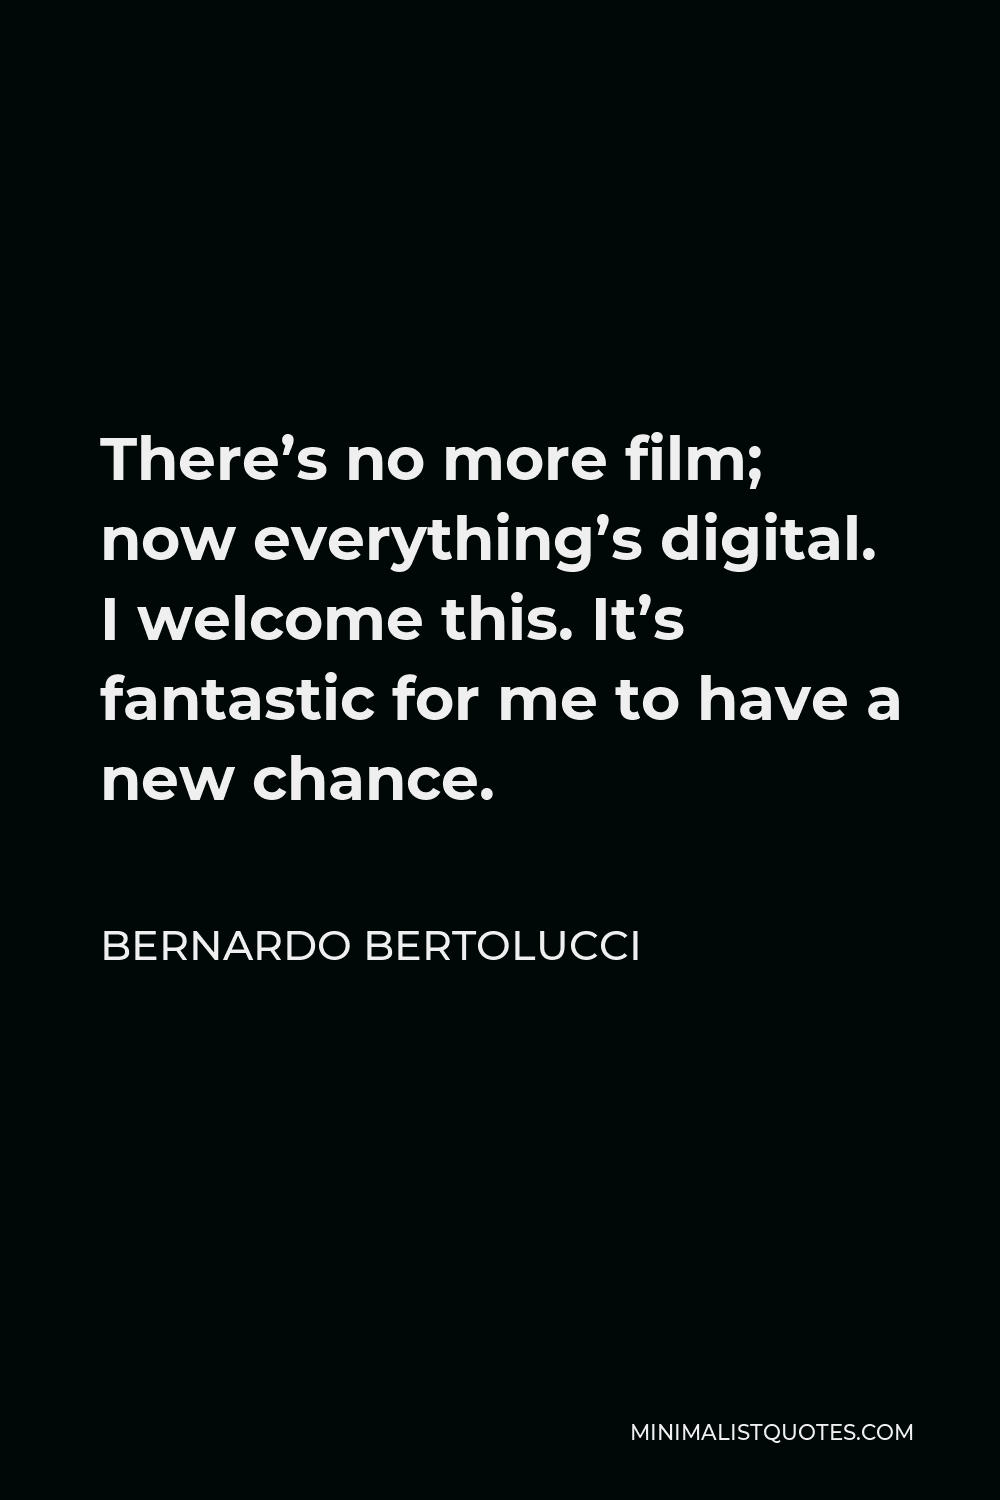 Bernardo Bertolucci Quote - There’s no more film; now everything’s digital. I welcome this. It’s fantastic for me to have a new chance.